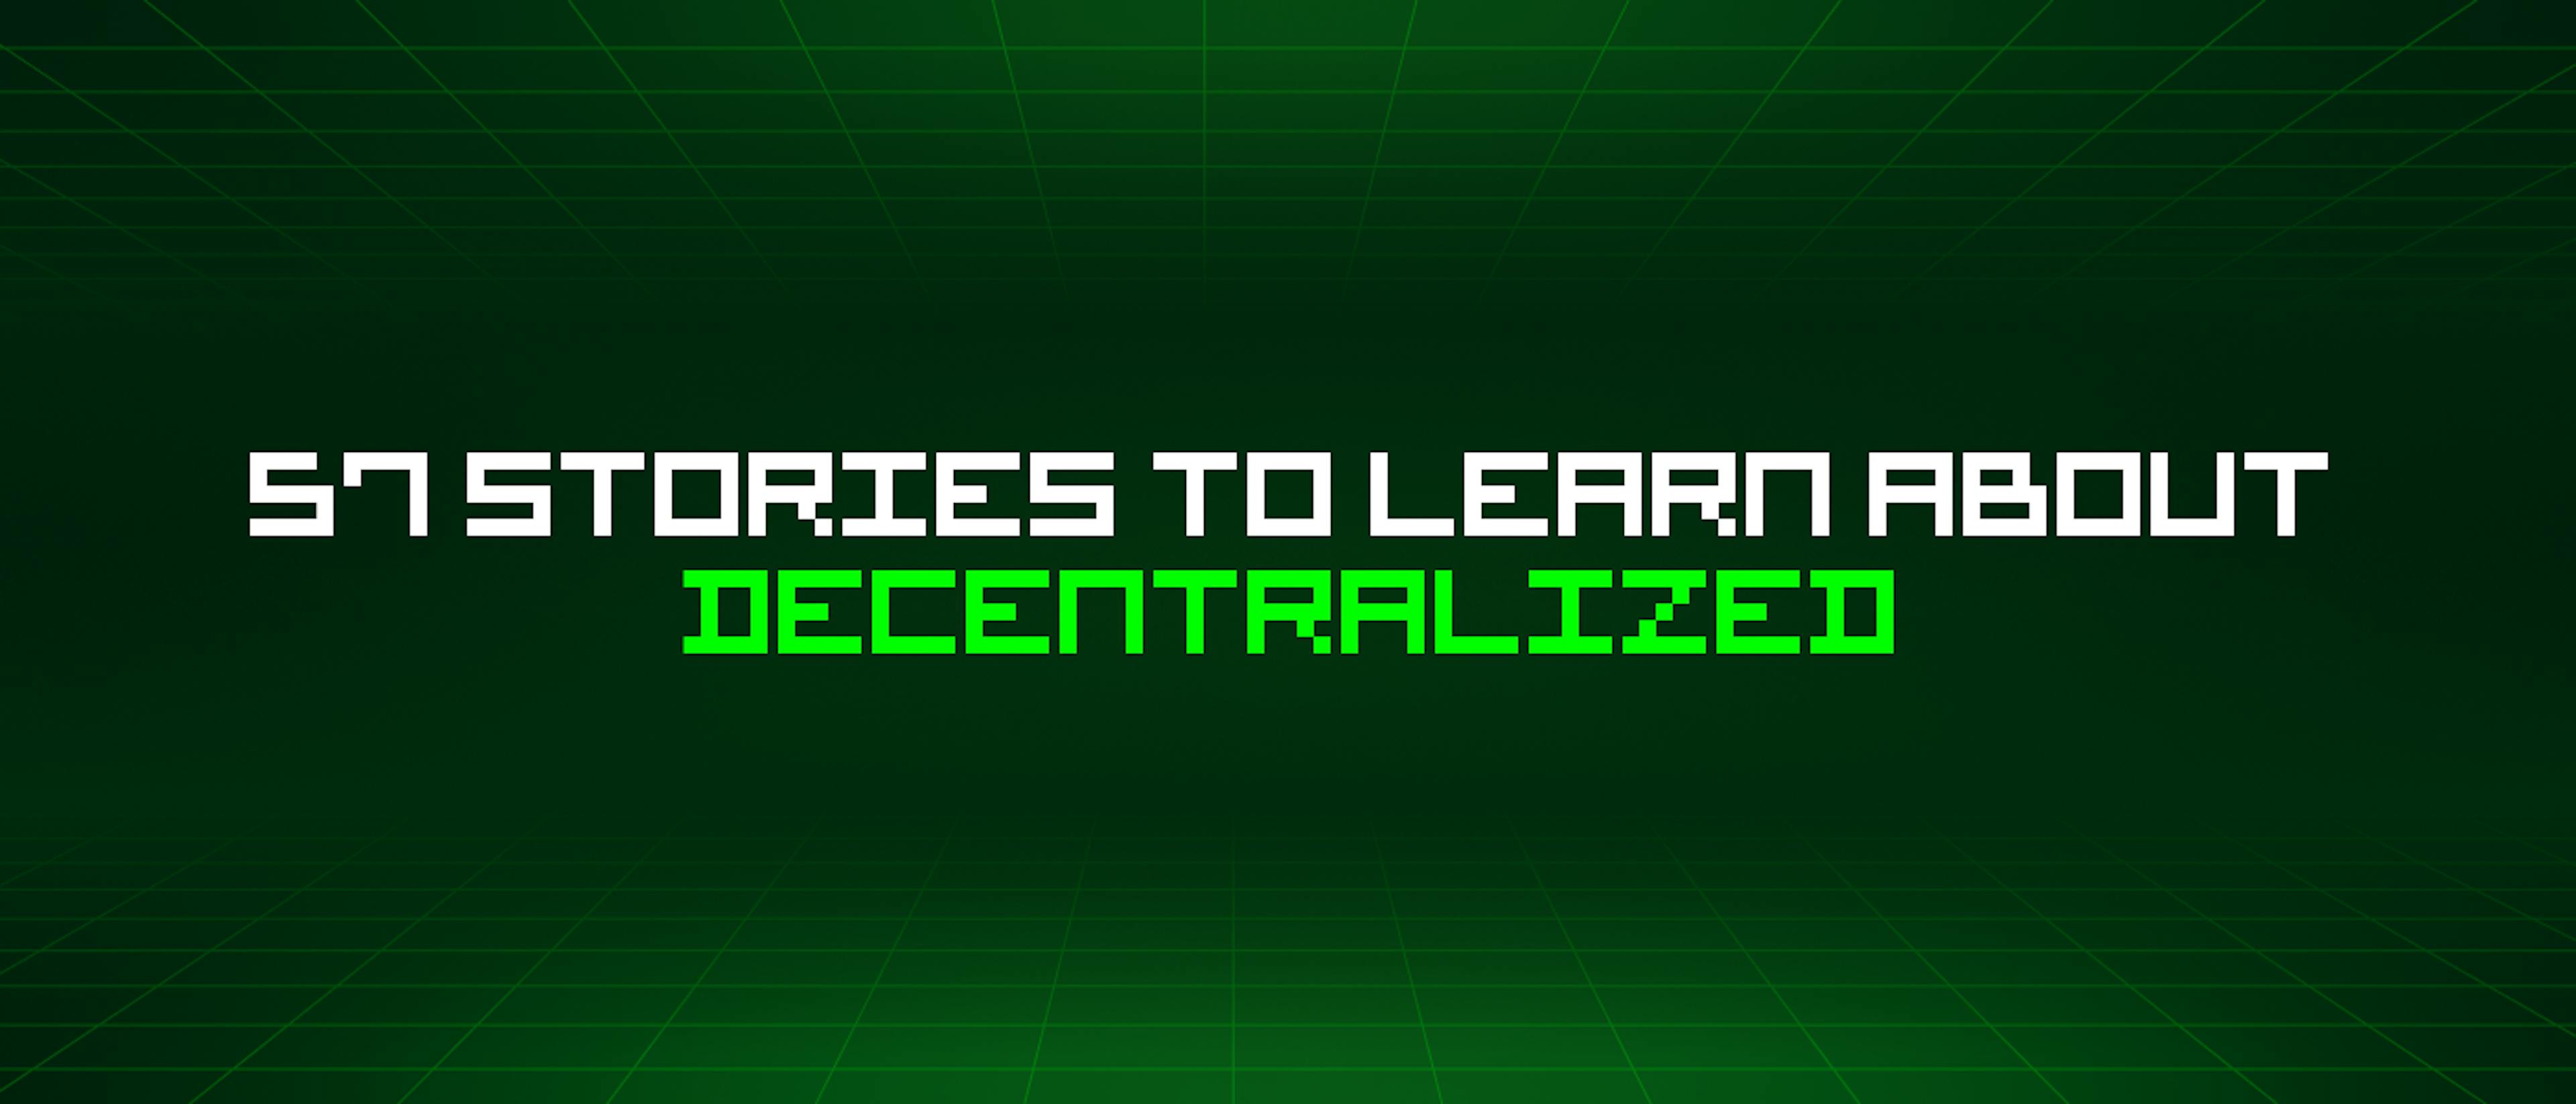 featured image - 57 Stories To Learn About Decentralized